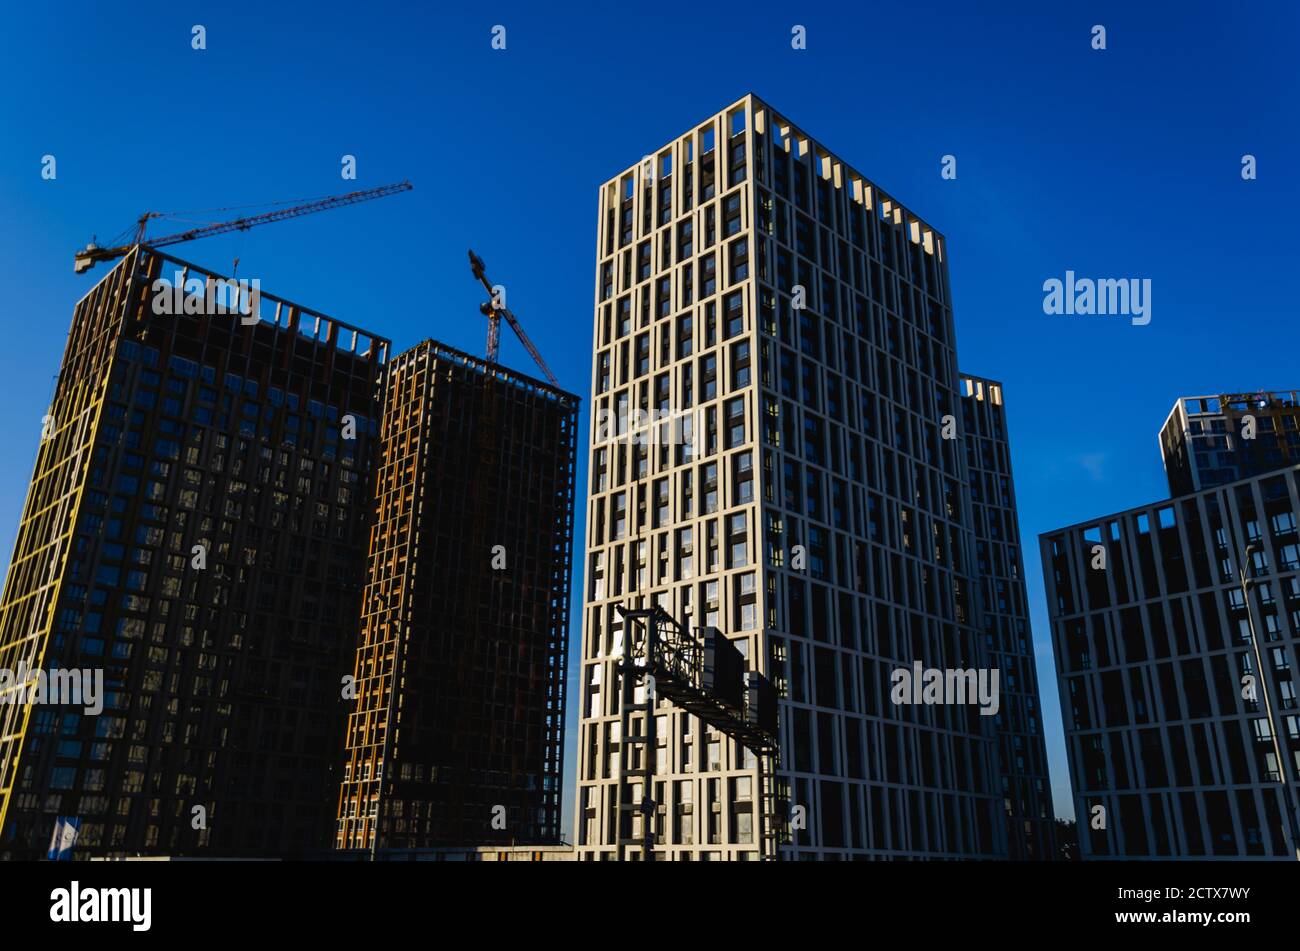 Housing development. Modern high-rise buildings under construction and cranes against the clear blue sky. Urban background. Urban sprawl concept Stock Photo